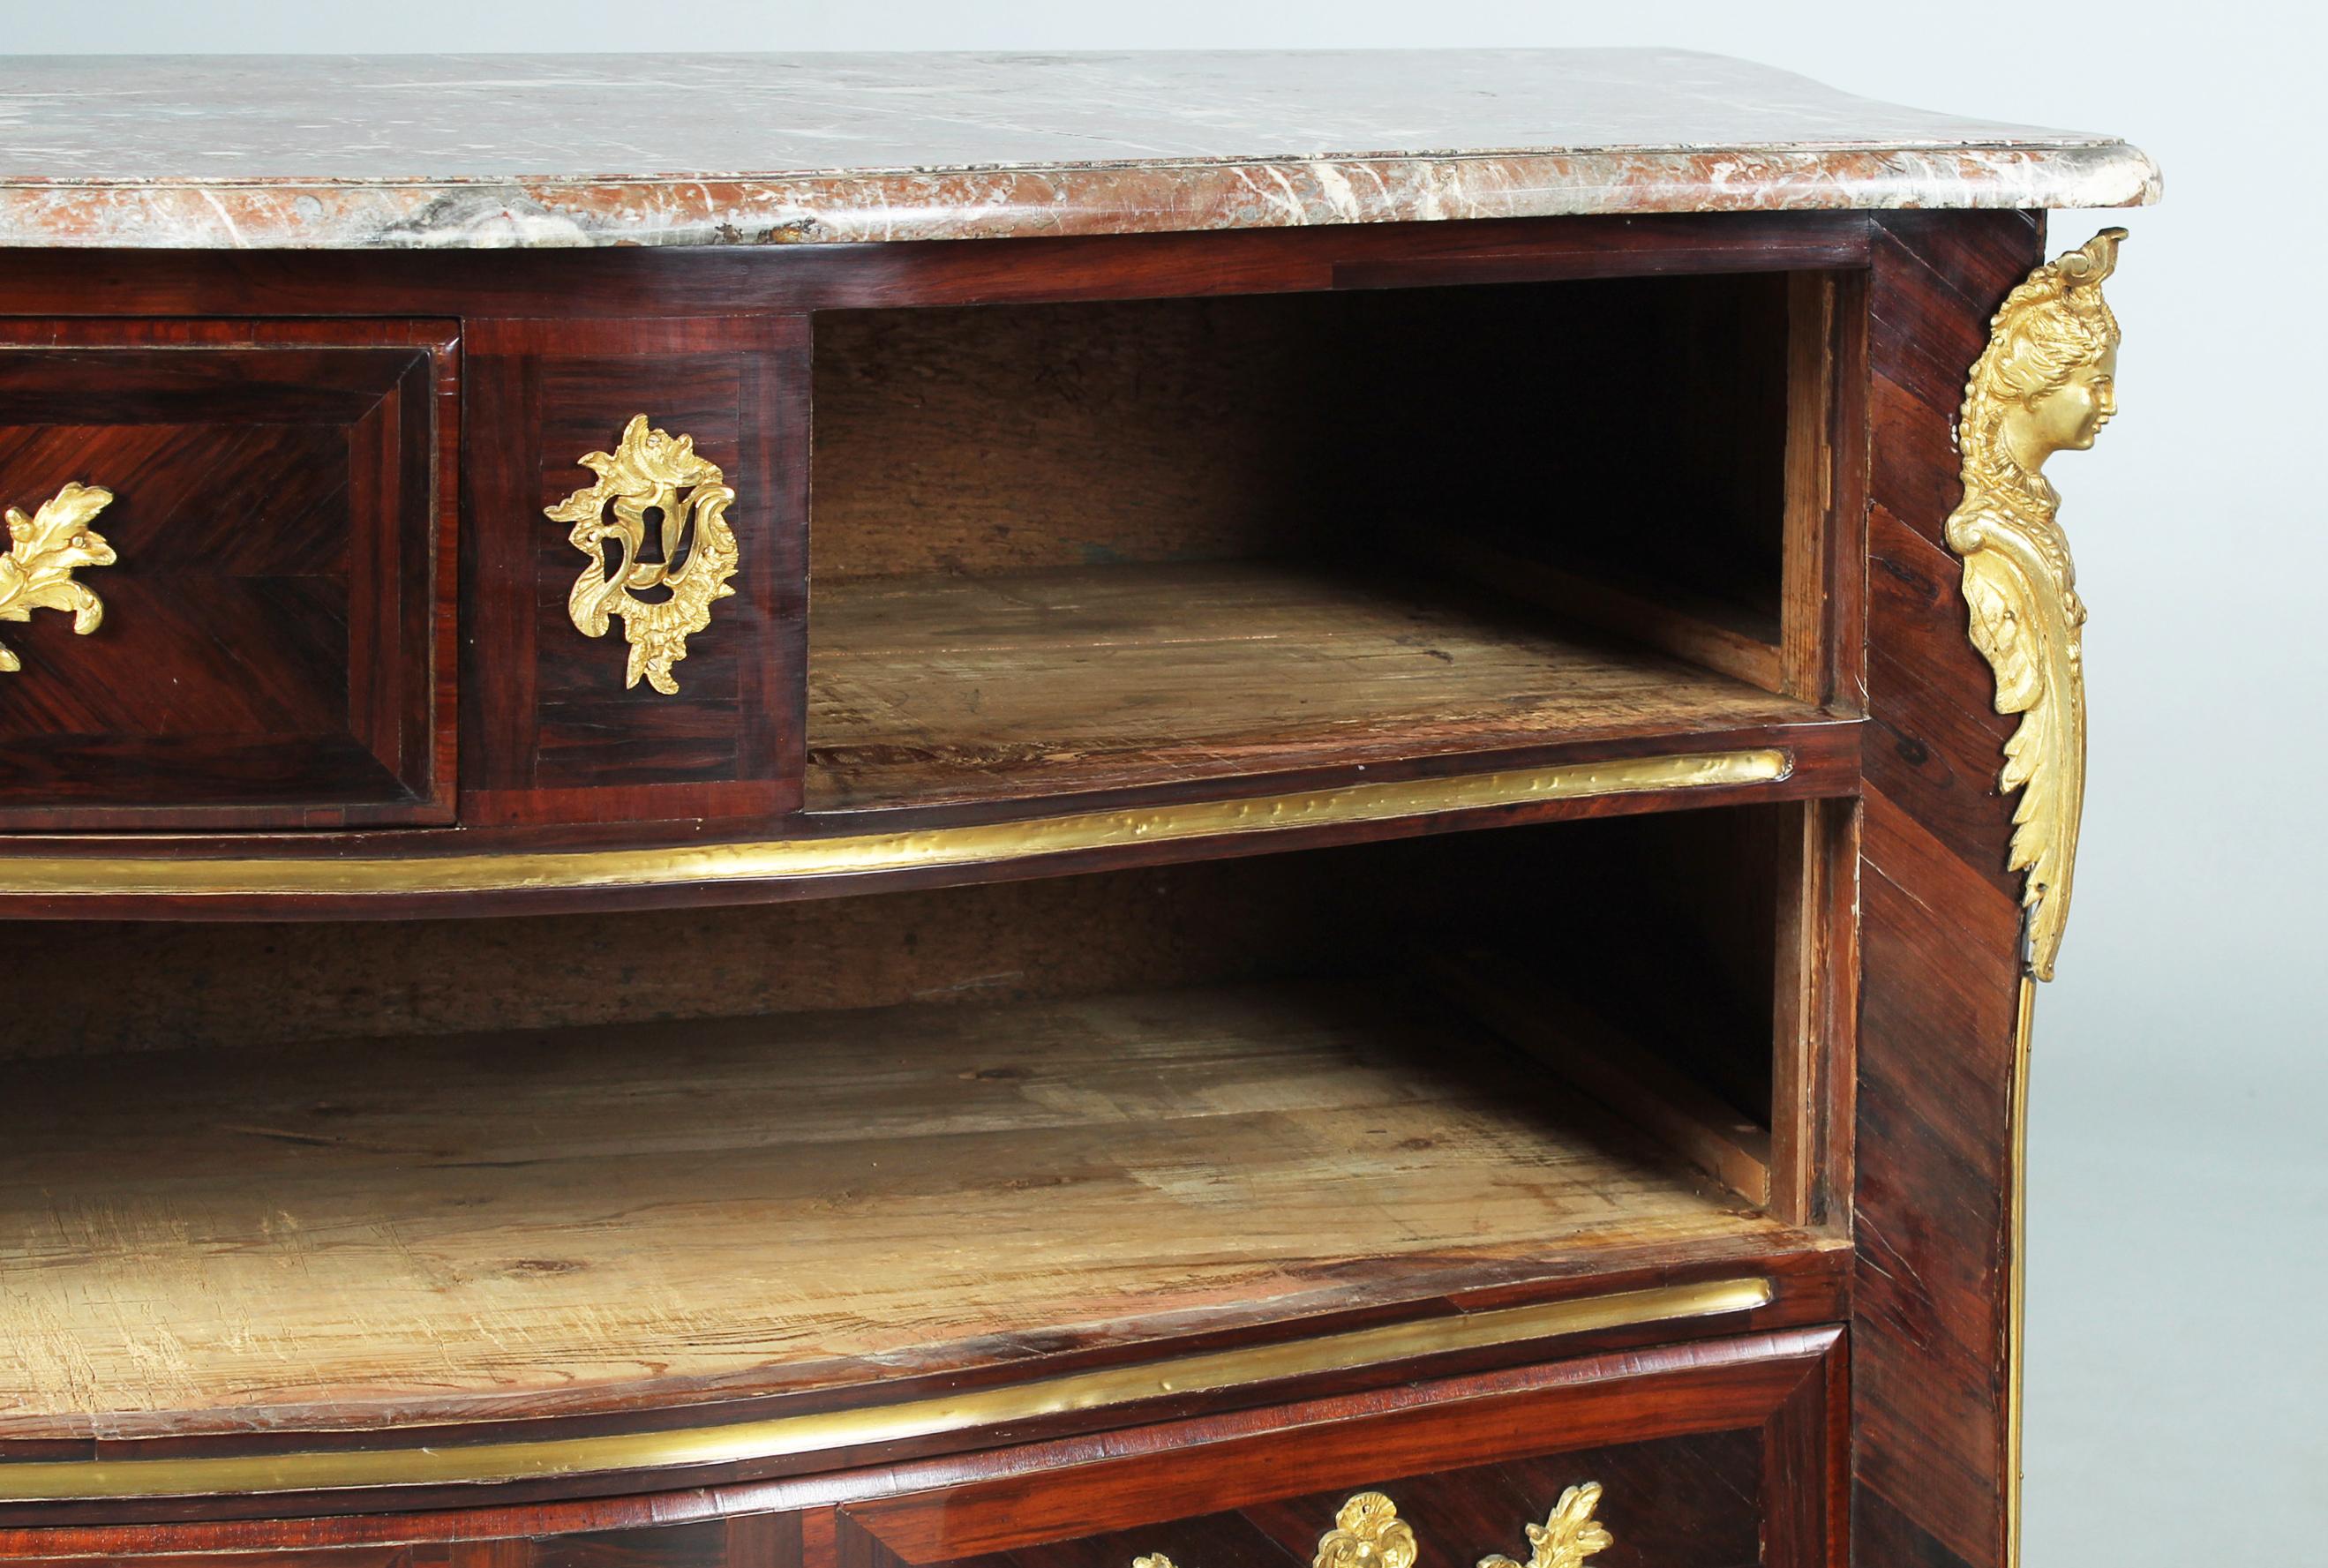 French Regence Chest of Drawers with Ormolu Fittings, Early 18th Century For Sale 3